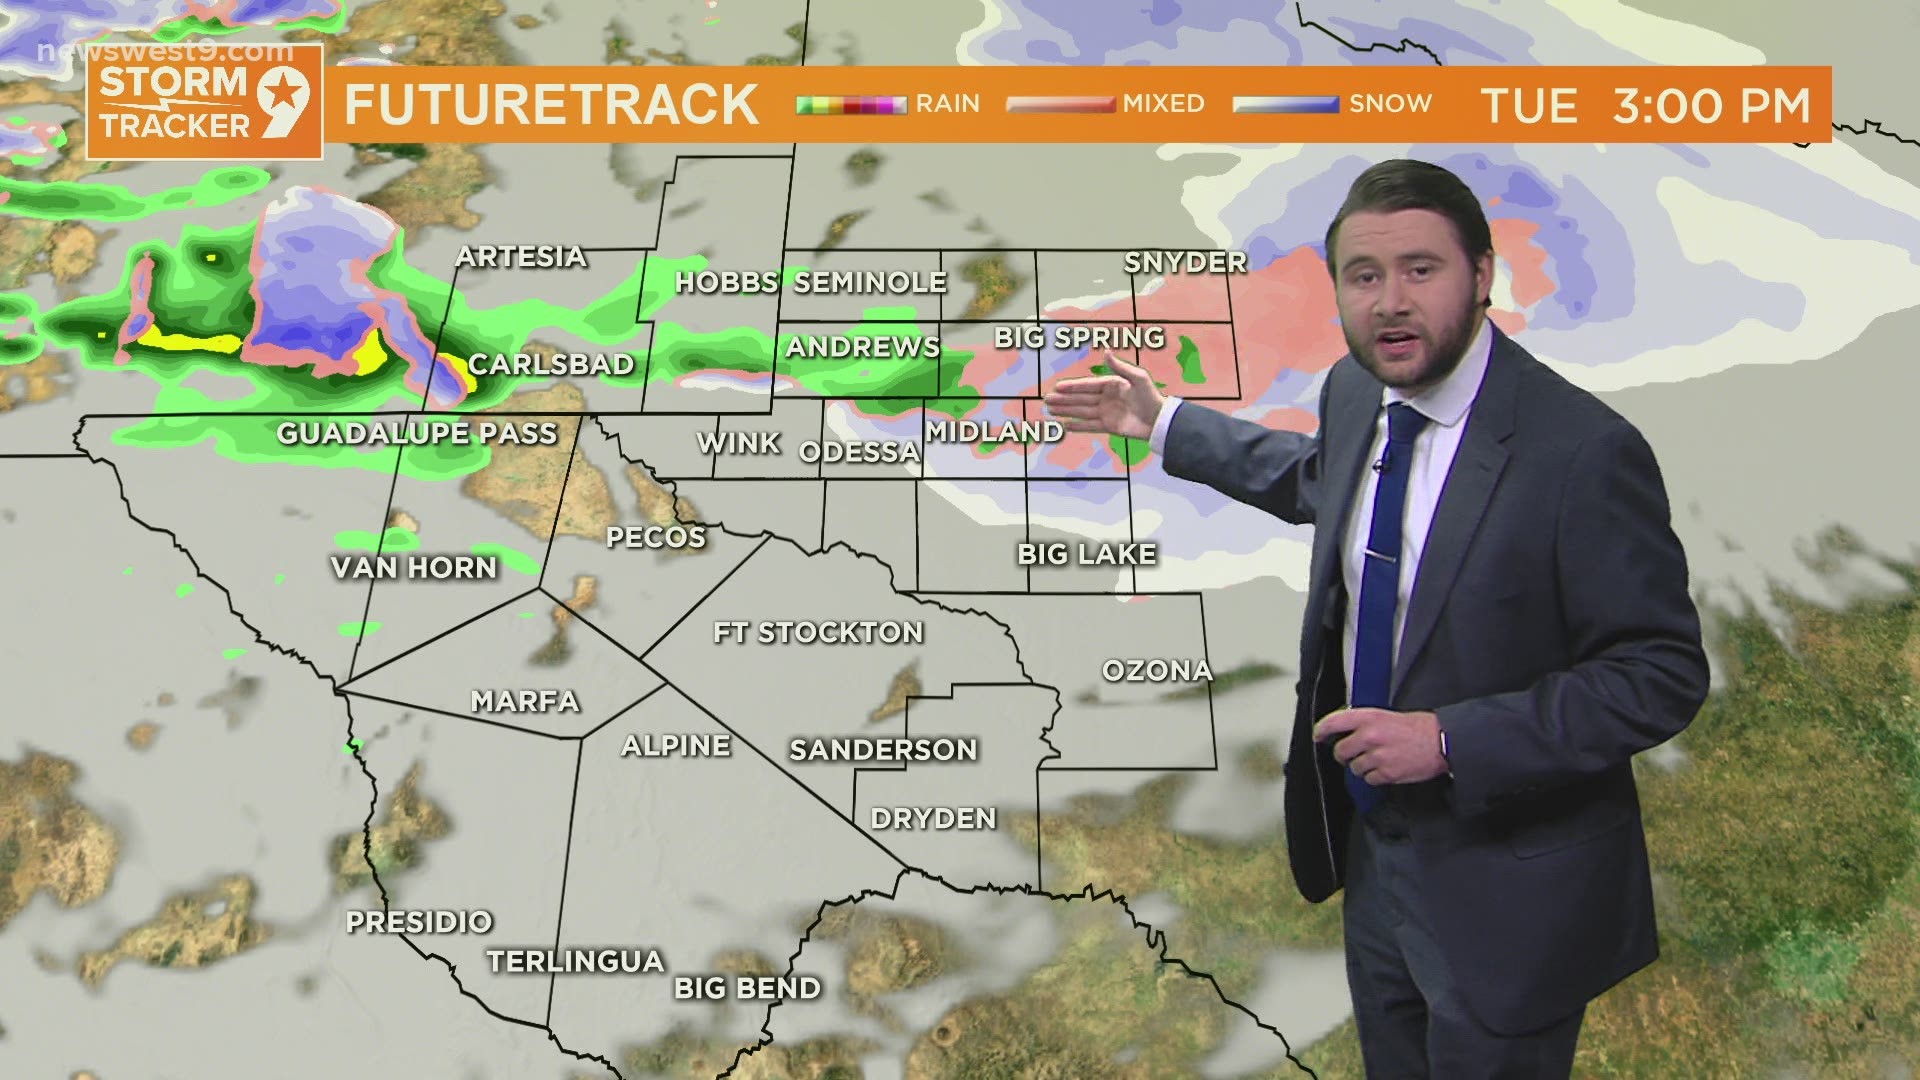 There will a wintry-mix happening throughout the day as temperatures rise throughout the Permian Basin.